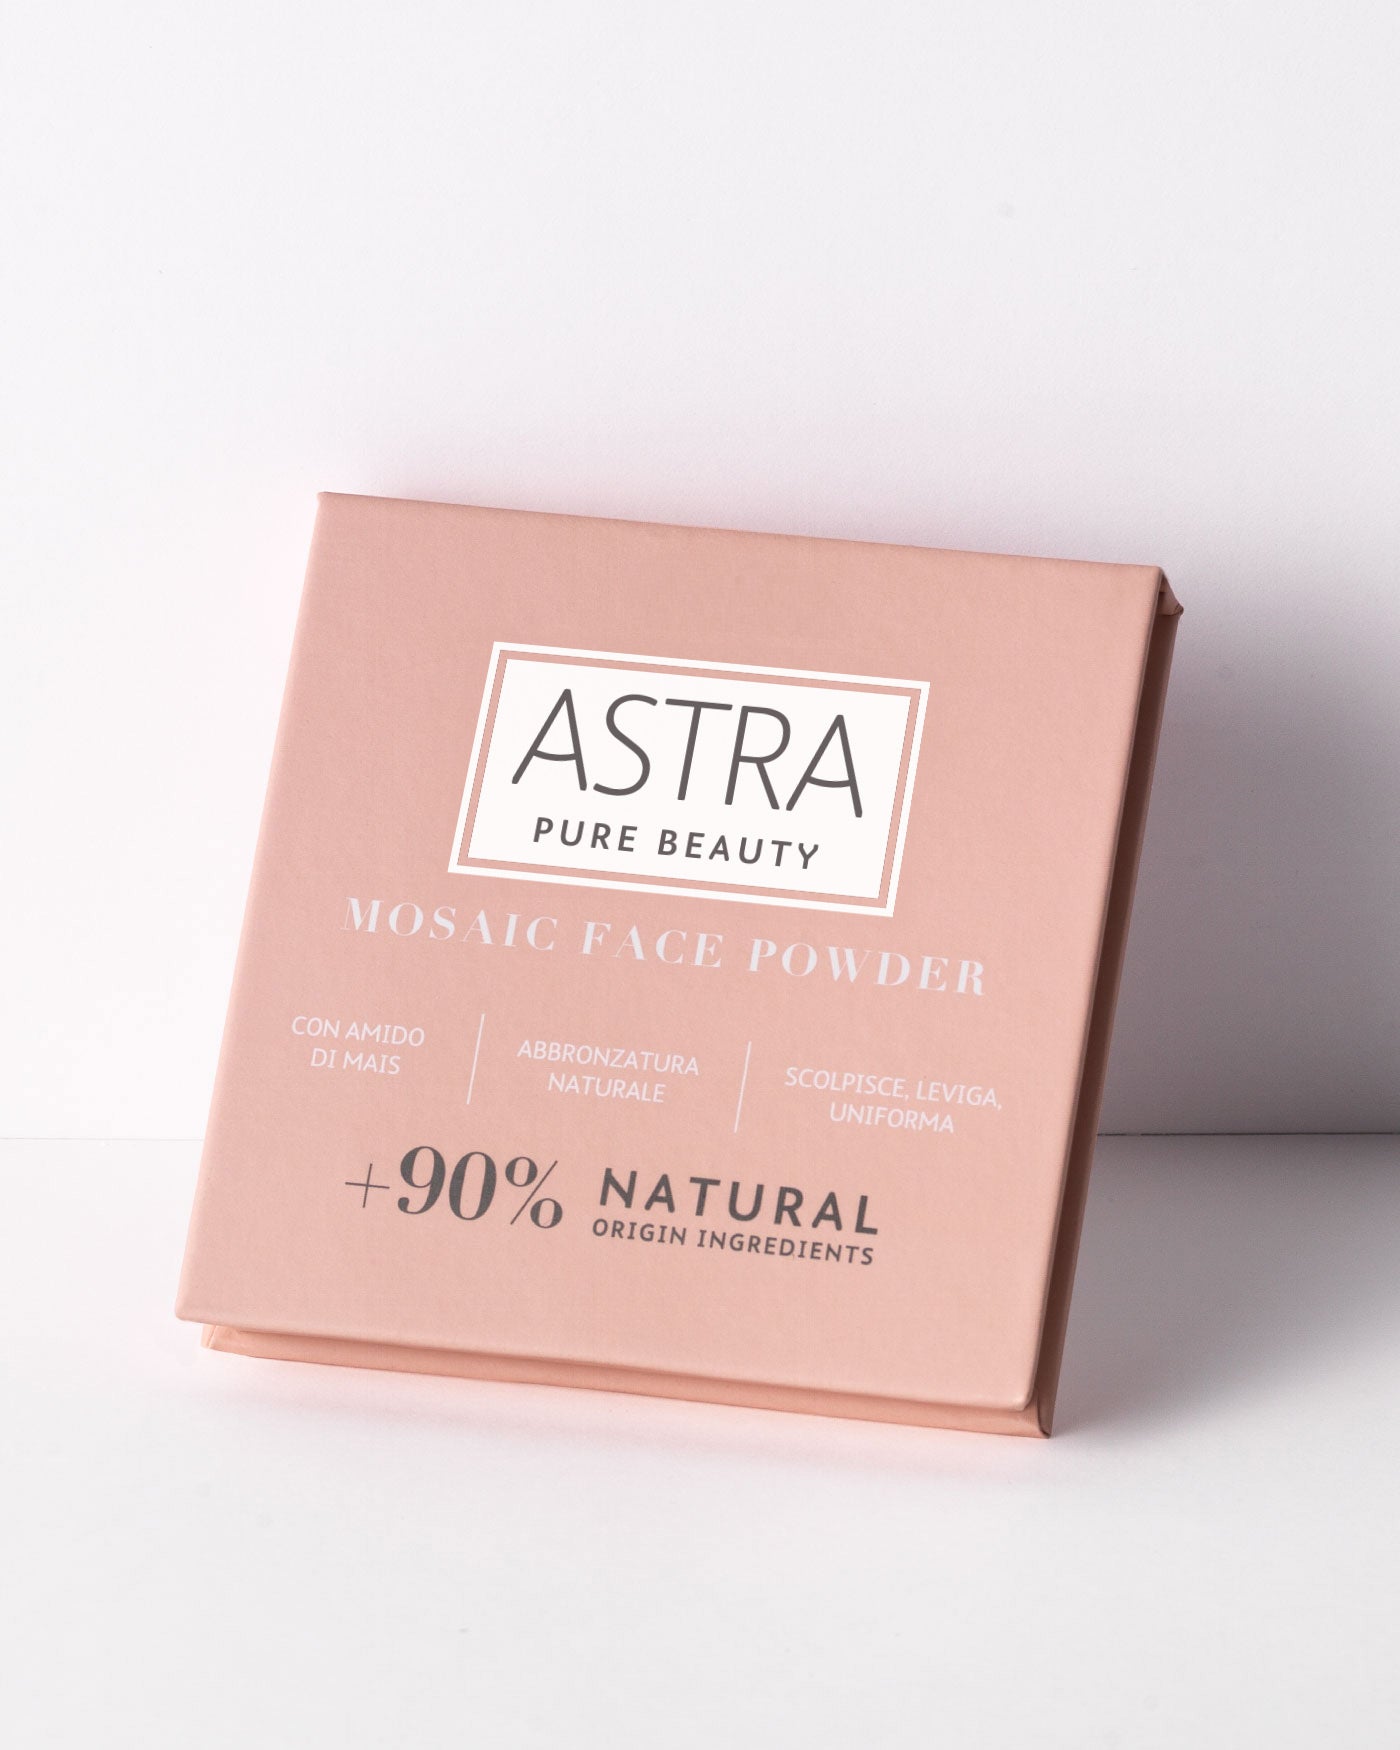 PURE BEAUTY MOSAIC FACE POWDER - All Products - Astra Make-Up